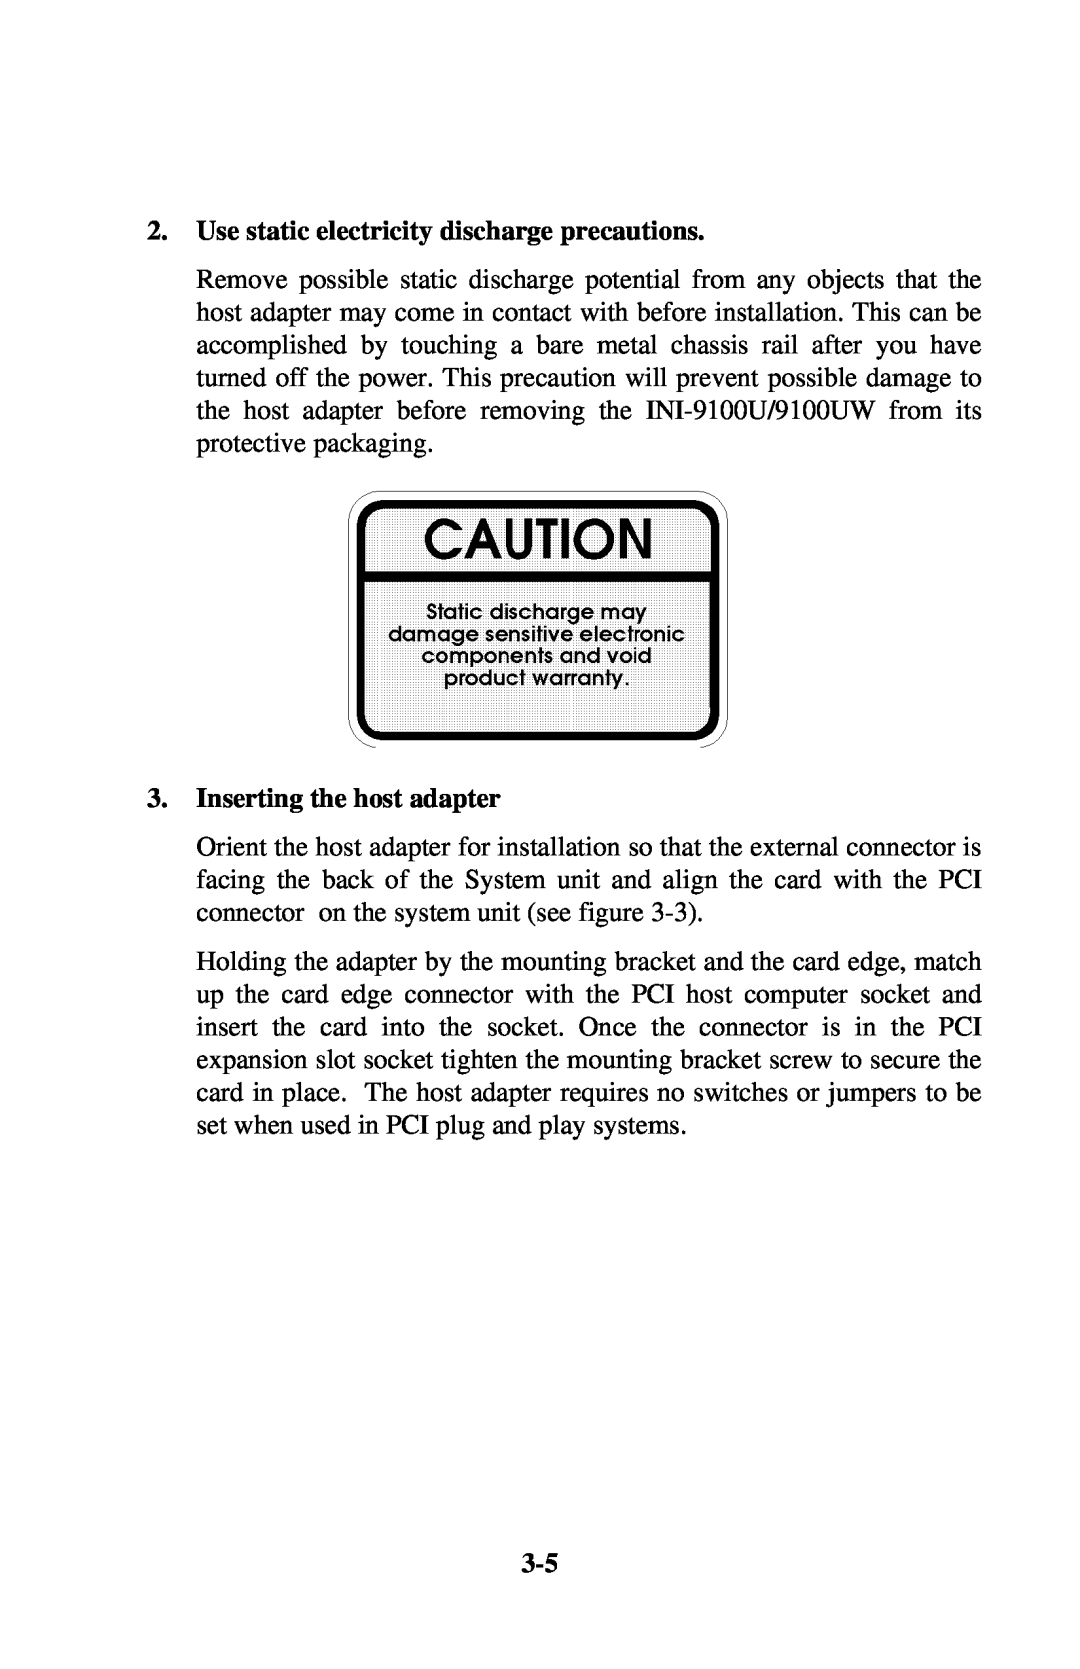 Initio INI-9100UW user manual Use static electricity discharge precautions, Inserting the host adapter 